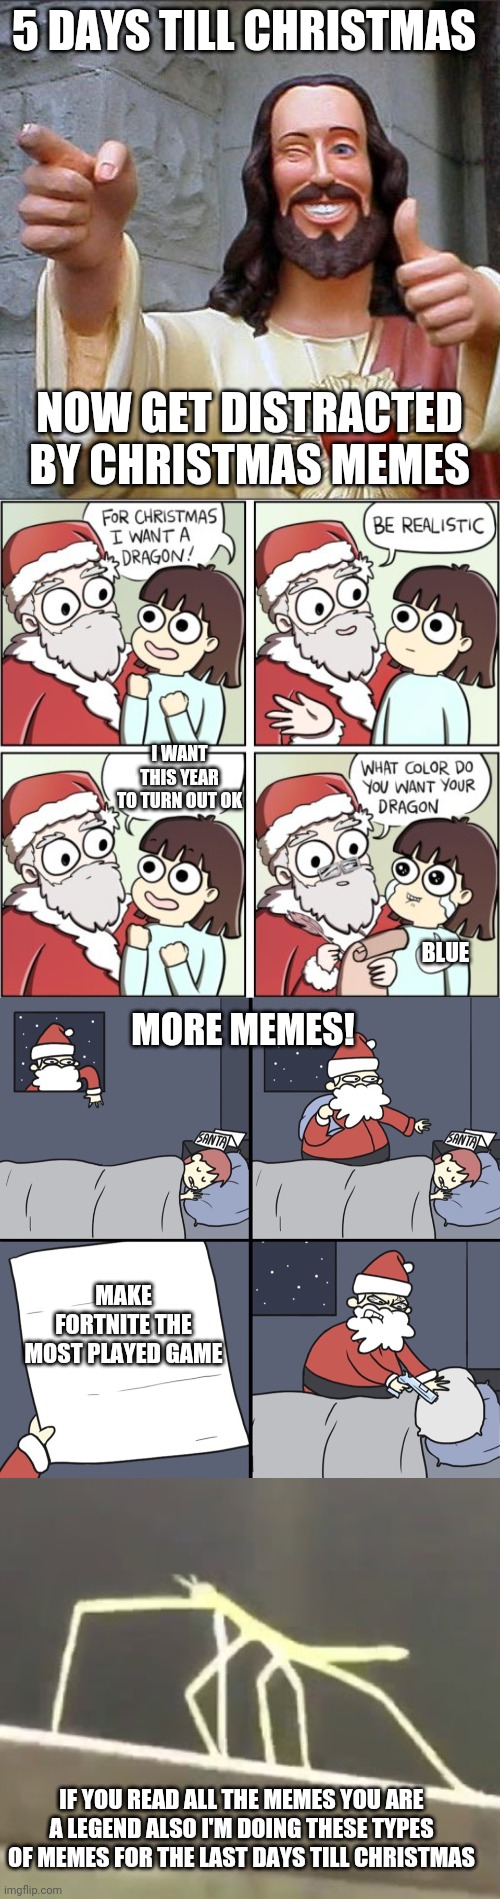 4 memes in 1 for 5 days till Christmas | 5 DAYS TILL CHRISTMAS; NOW GET DISTRACTED BY CHRISTMAS MEMES; I WANT THIS YEAR TO TURN OUT OK; BLUE; MORE MEMES! MAKE FORTNITE THE MOST PLAYED GAME; IF YOU READ ALL THE MEMES YOU ARE A LEGEND ALSO I'M DOING THESE TYPES OF MEMES FOR THE LAST DAYS TILL CHRISTMAS | image tagged in memes,buddy christ,for christmas i want a dragon,letter to murderous santa,get stickbugged lol | made w/ Imgflip meme maker